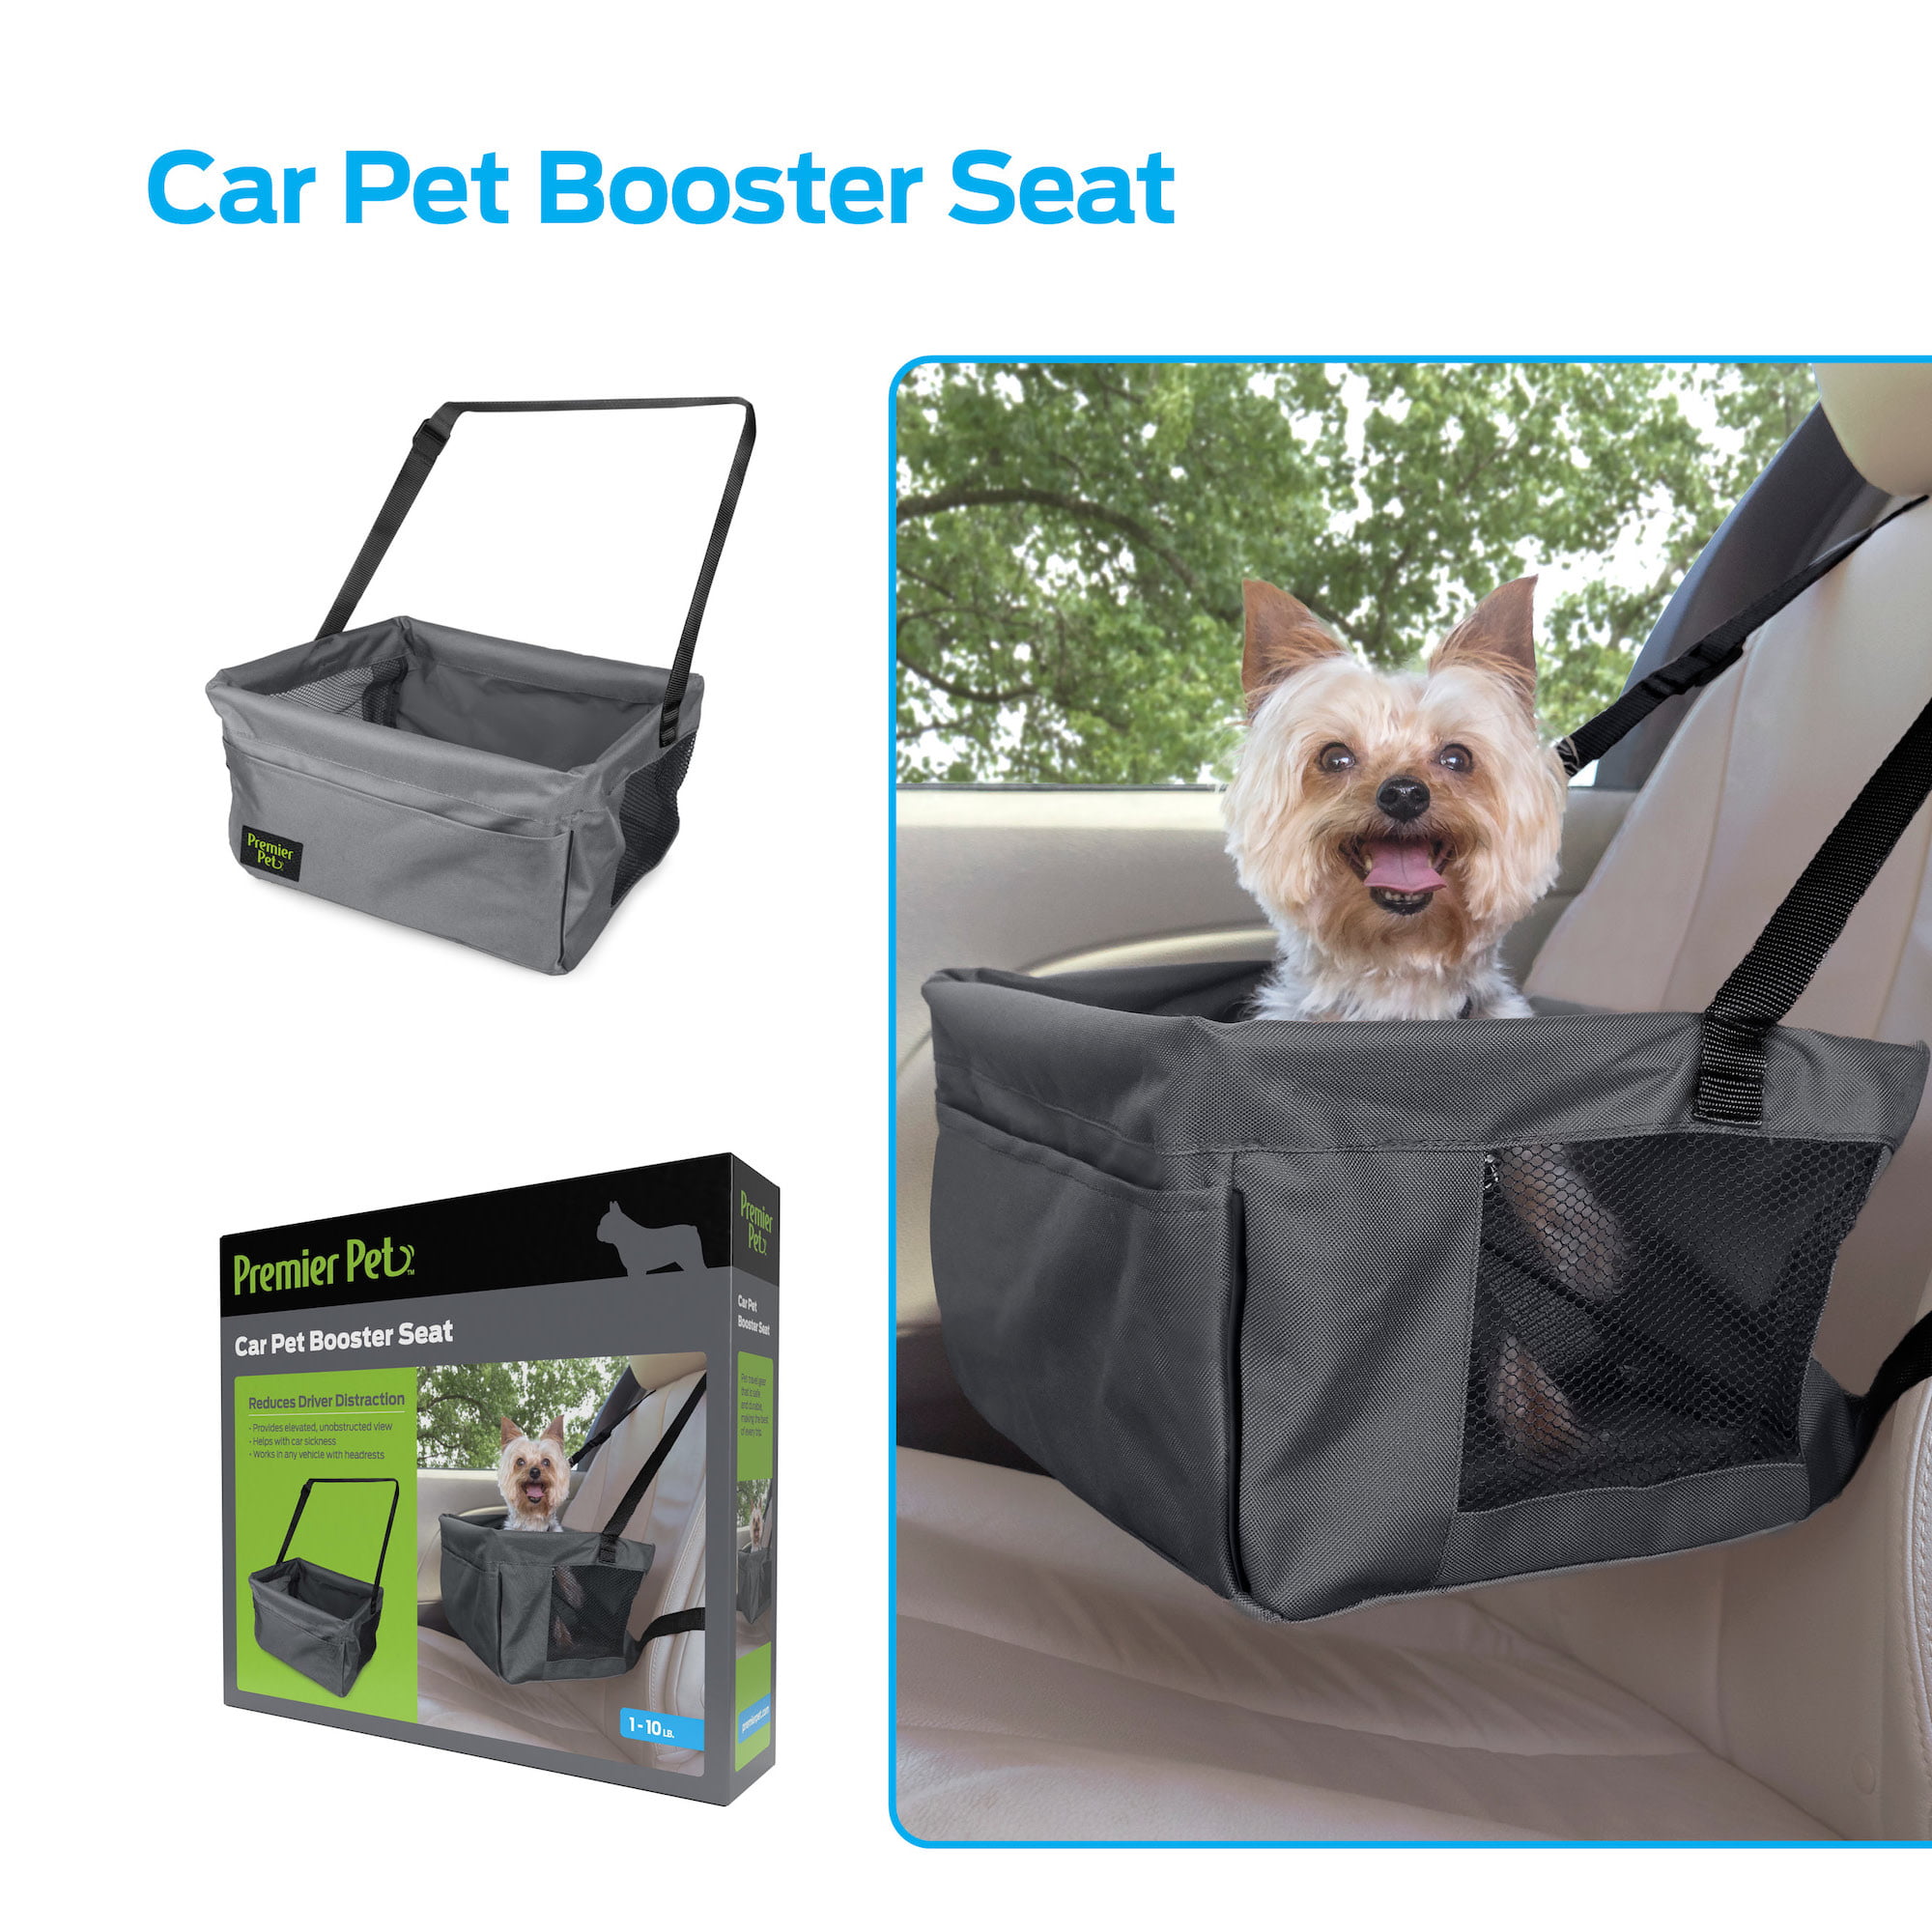 Premier Pet Car Booster Seat for Small Dogs